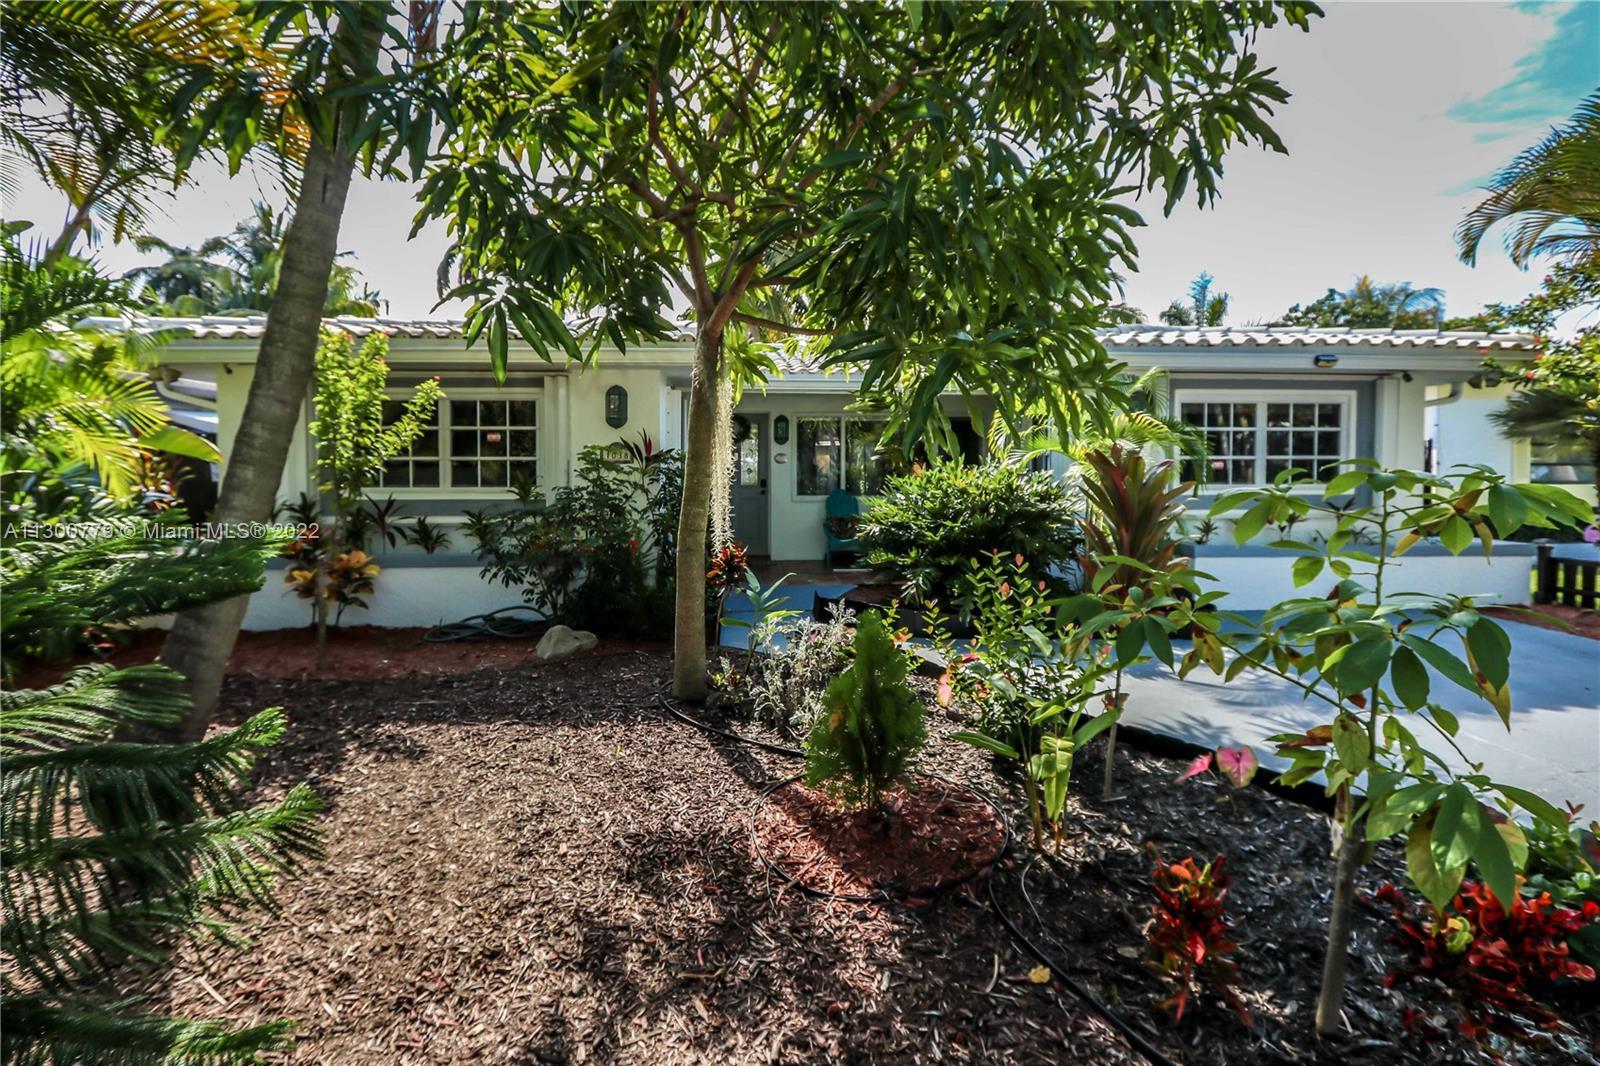 WELCOME TO YOUR TROPICAL OASIS! GORGEOUS 3 BED, 2 BATH HOME WITH ROOM FOR A POOL IN THE HEART OF HOL